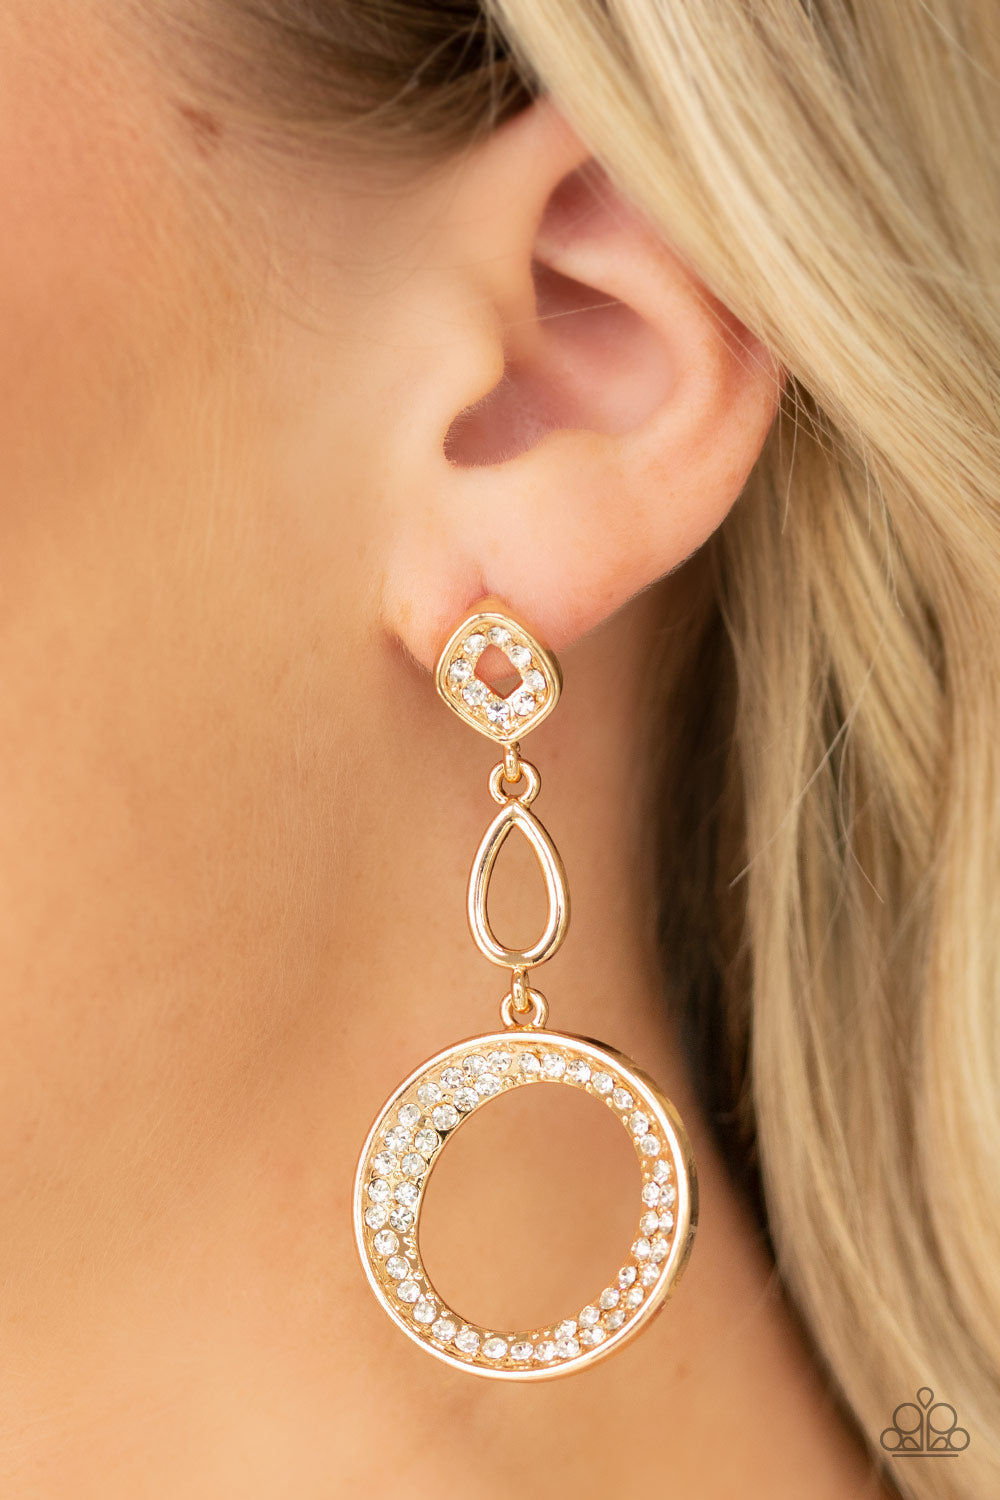 On The Glamour Scene - Gold Post Earrings - Paparazzi Accessories - Rows of glassy white rhinestones, mismatched beveled gold frames link with a golden teardrop as they trickle from the ear, coalescing into a glamorous lure. Earring attaches to a standard post fitting.